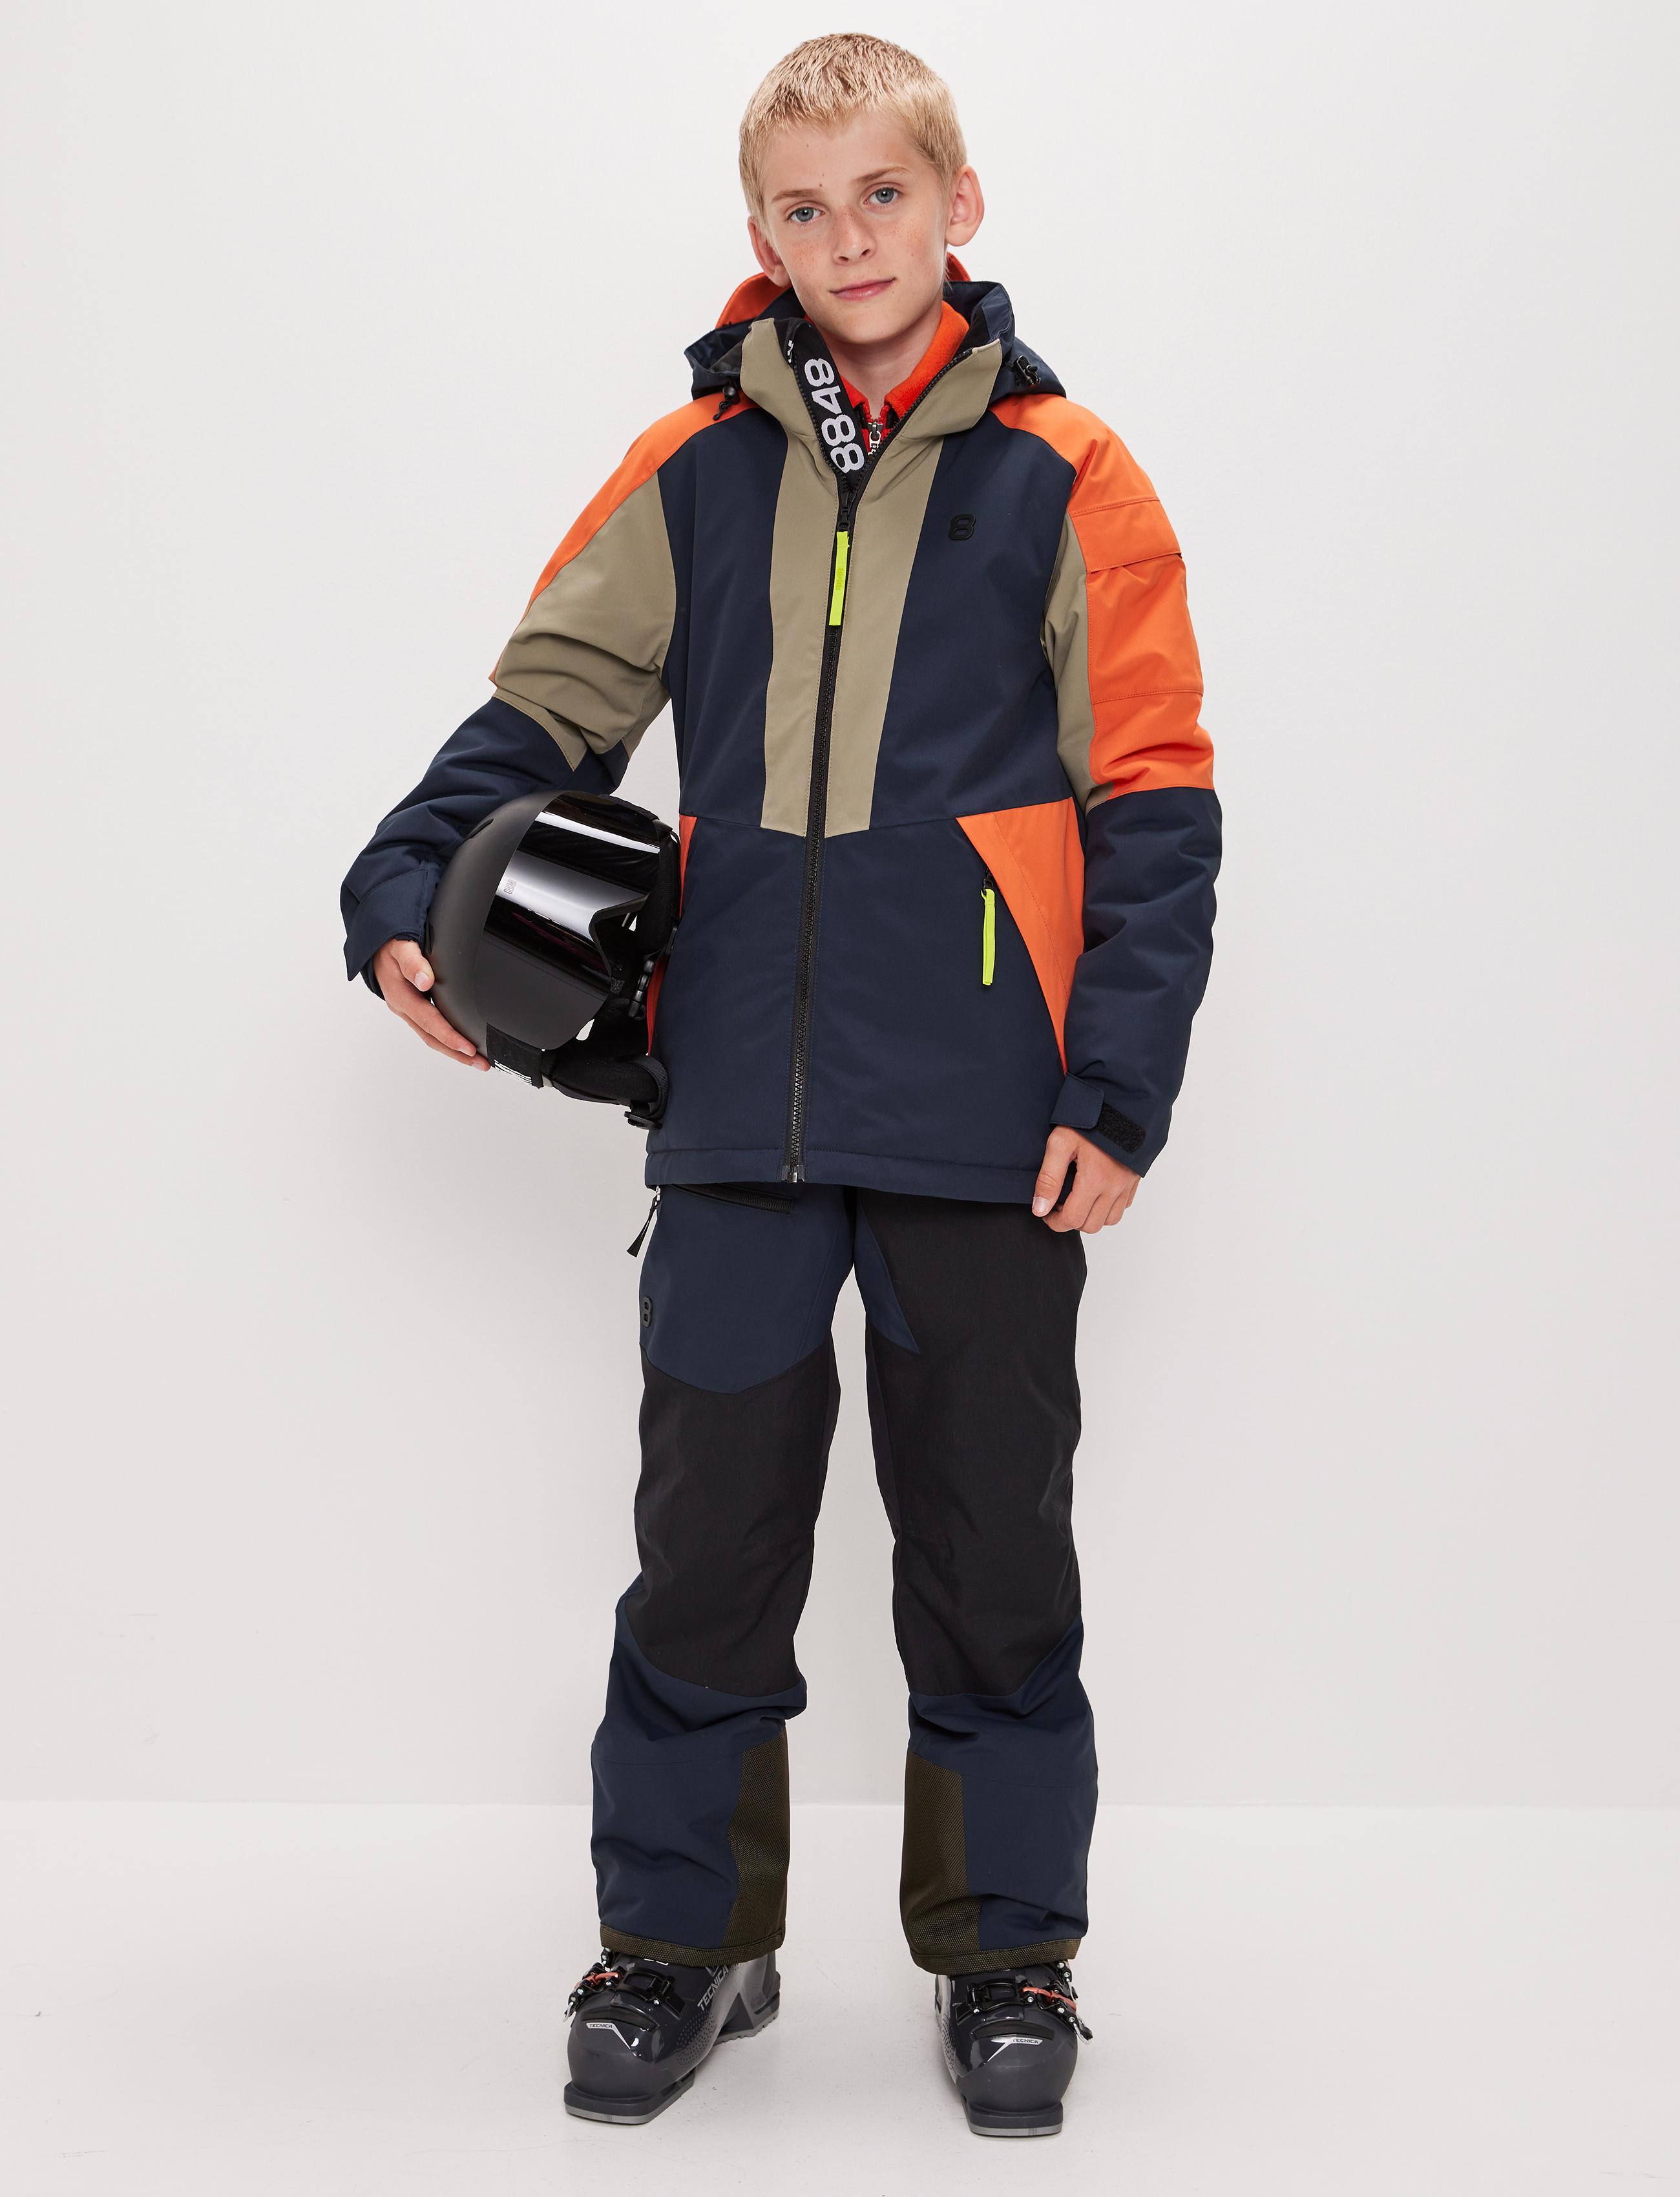 T Panda opladning Kids' clothing for all adventures - 8848 Altitude